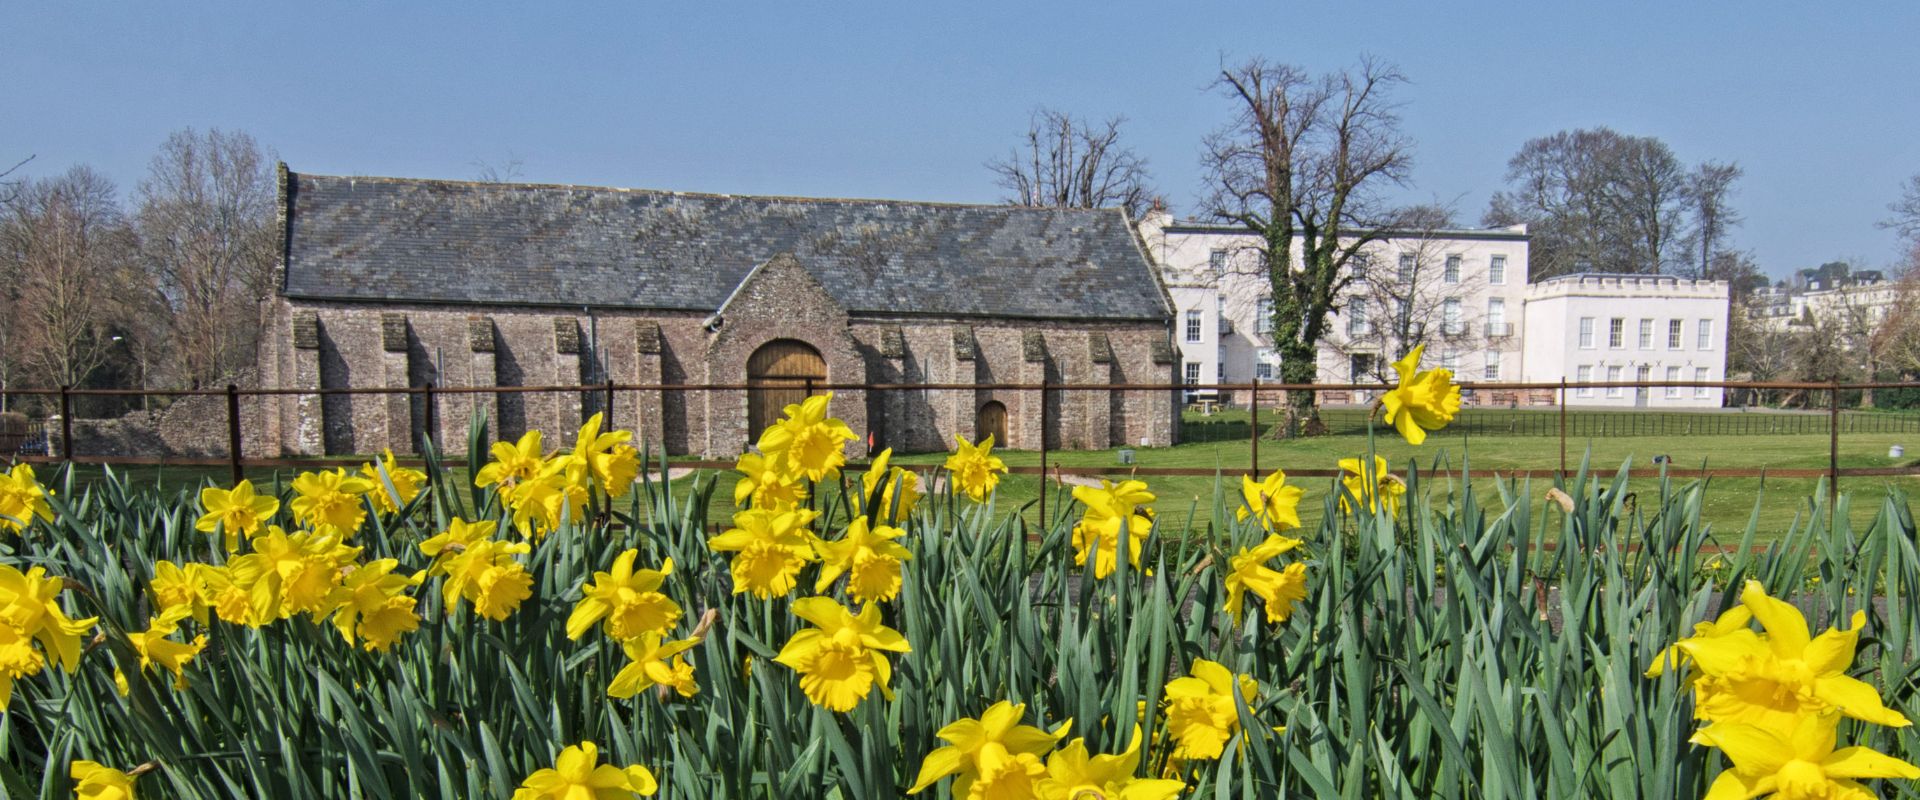 Daffodils in front of the Spanish Barn at Torre Abbey in Torquay